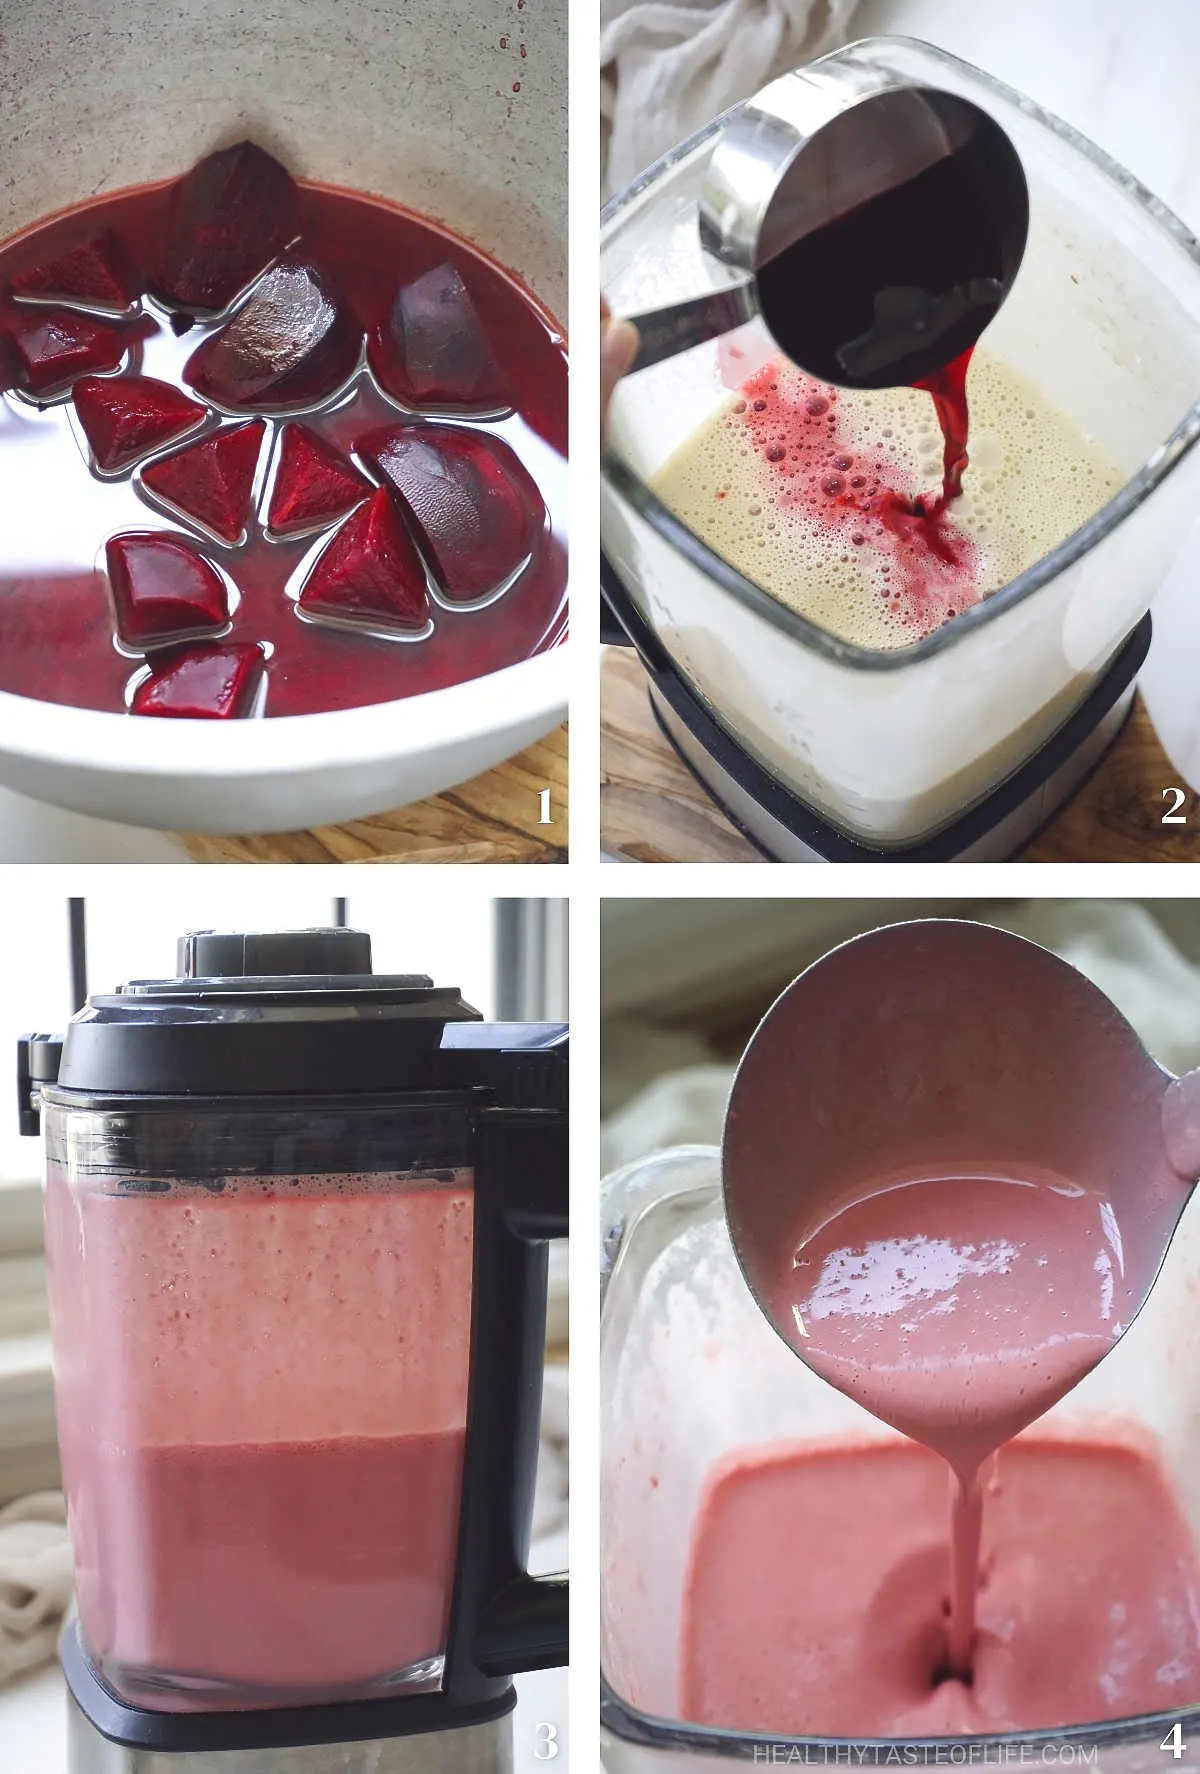 Process shots showing how to make pink crepe batter for strawberry crepes cake.